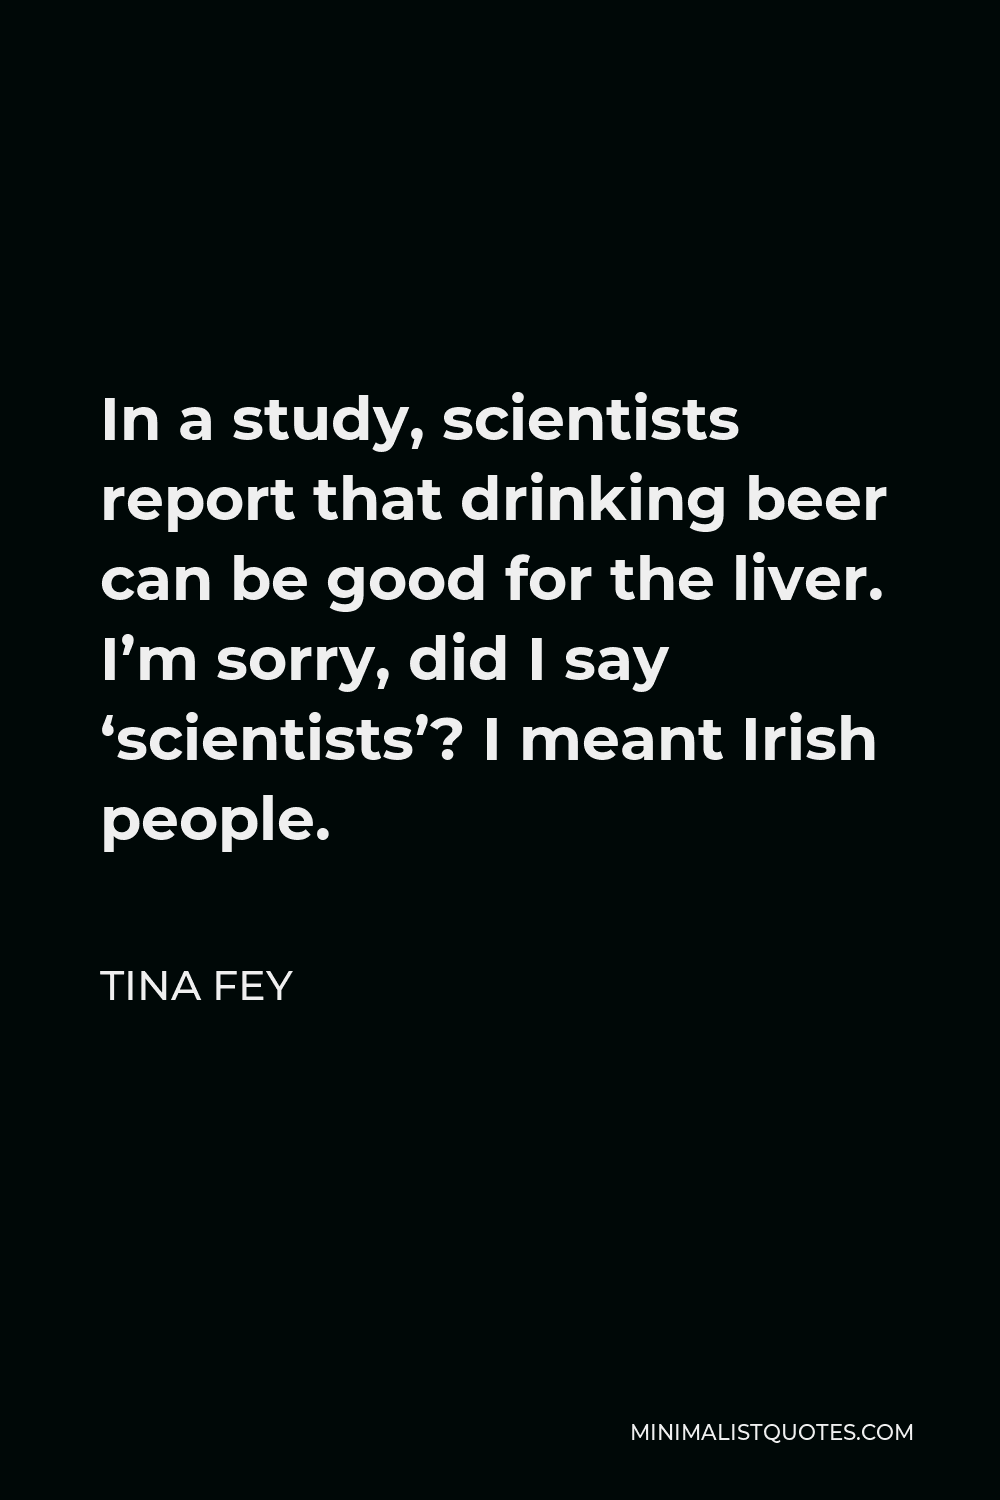 Tina Fey Quote - In a study, scientists report that drinking beer can be good for the liver. I’m sorry, did I say ‘scientists’? I meant Irish people.